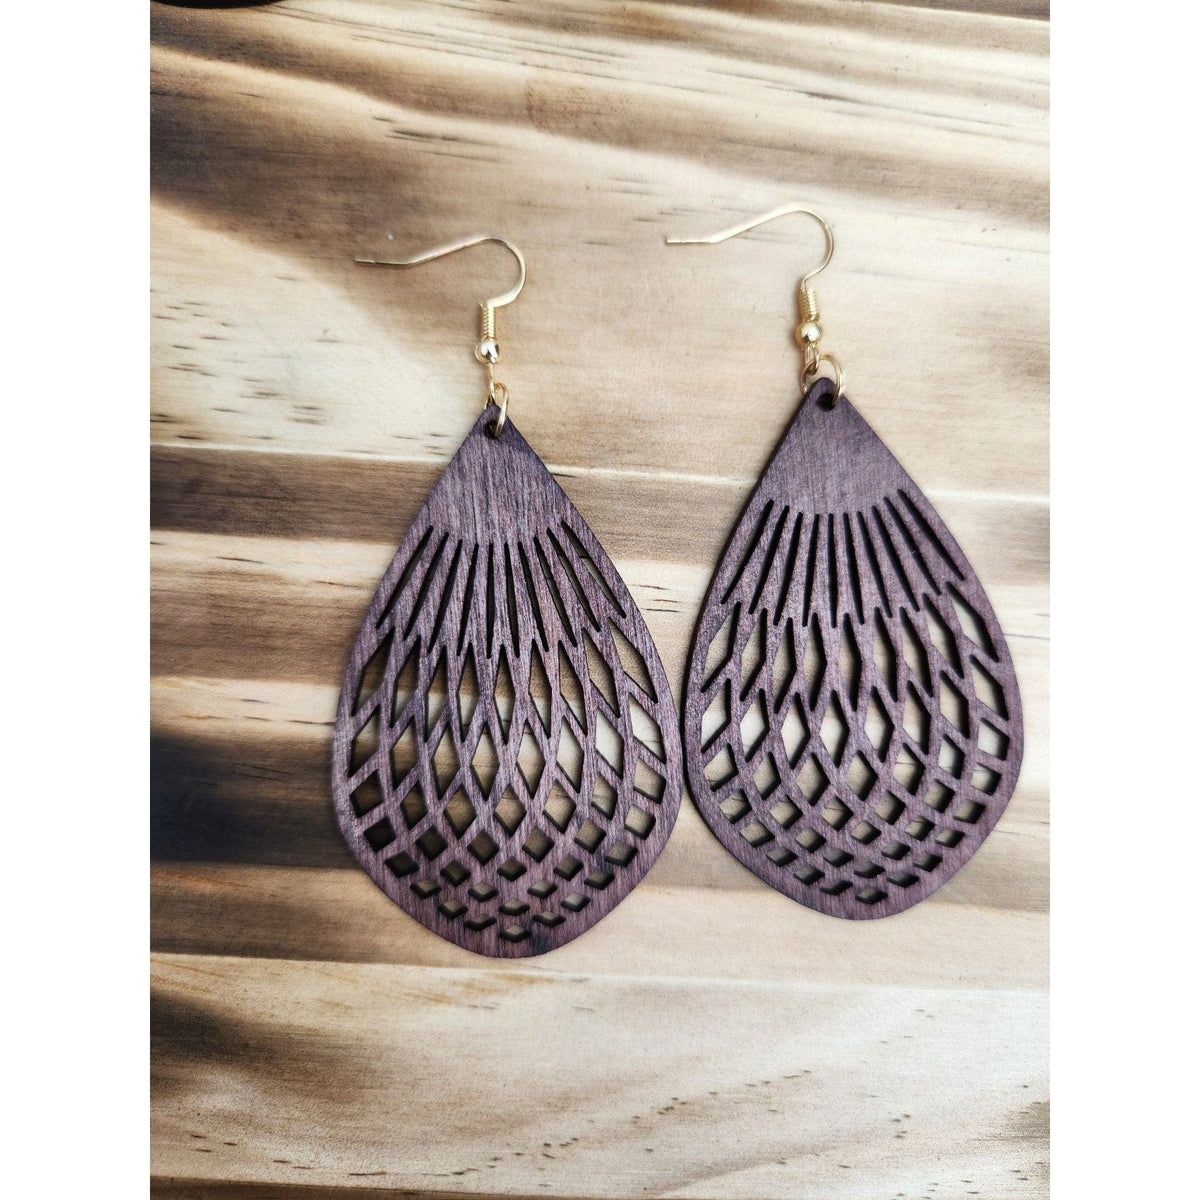 Wooden Dangle Earrings | Lightweight | Boho Vibes Earrings TheFringeCultureCollective